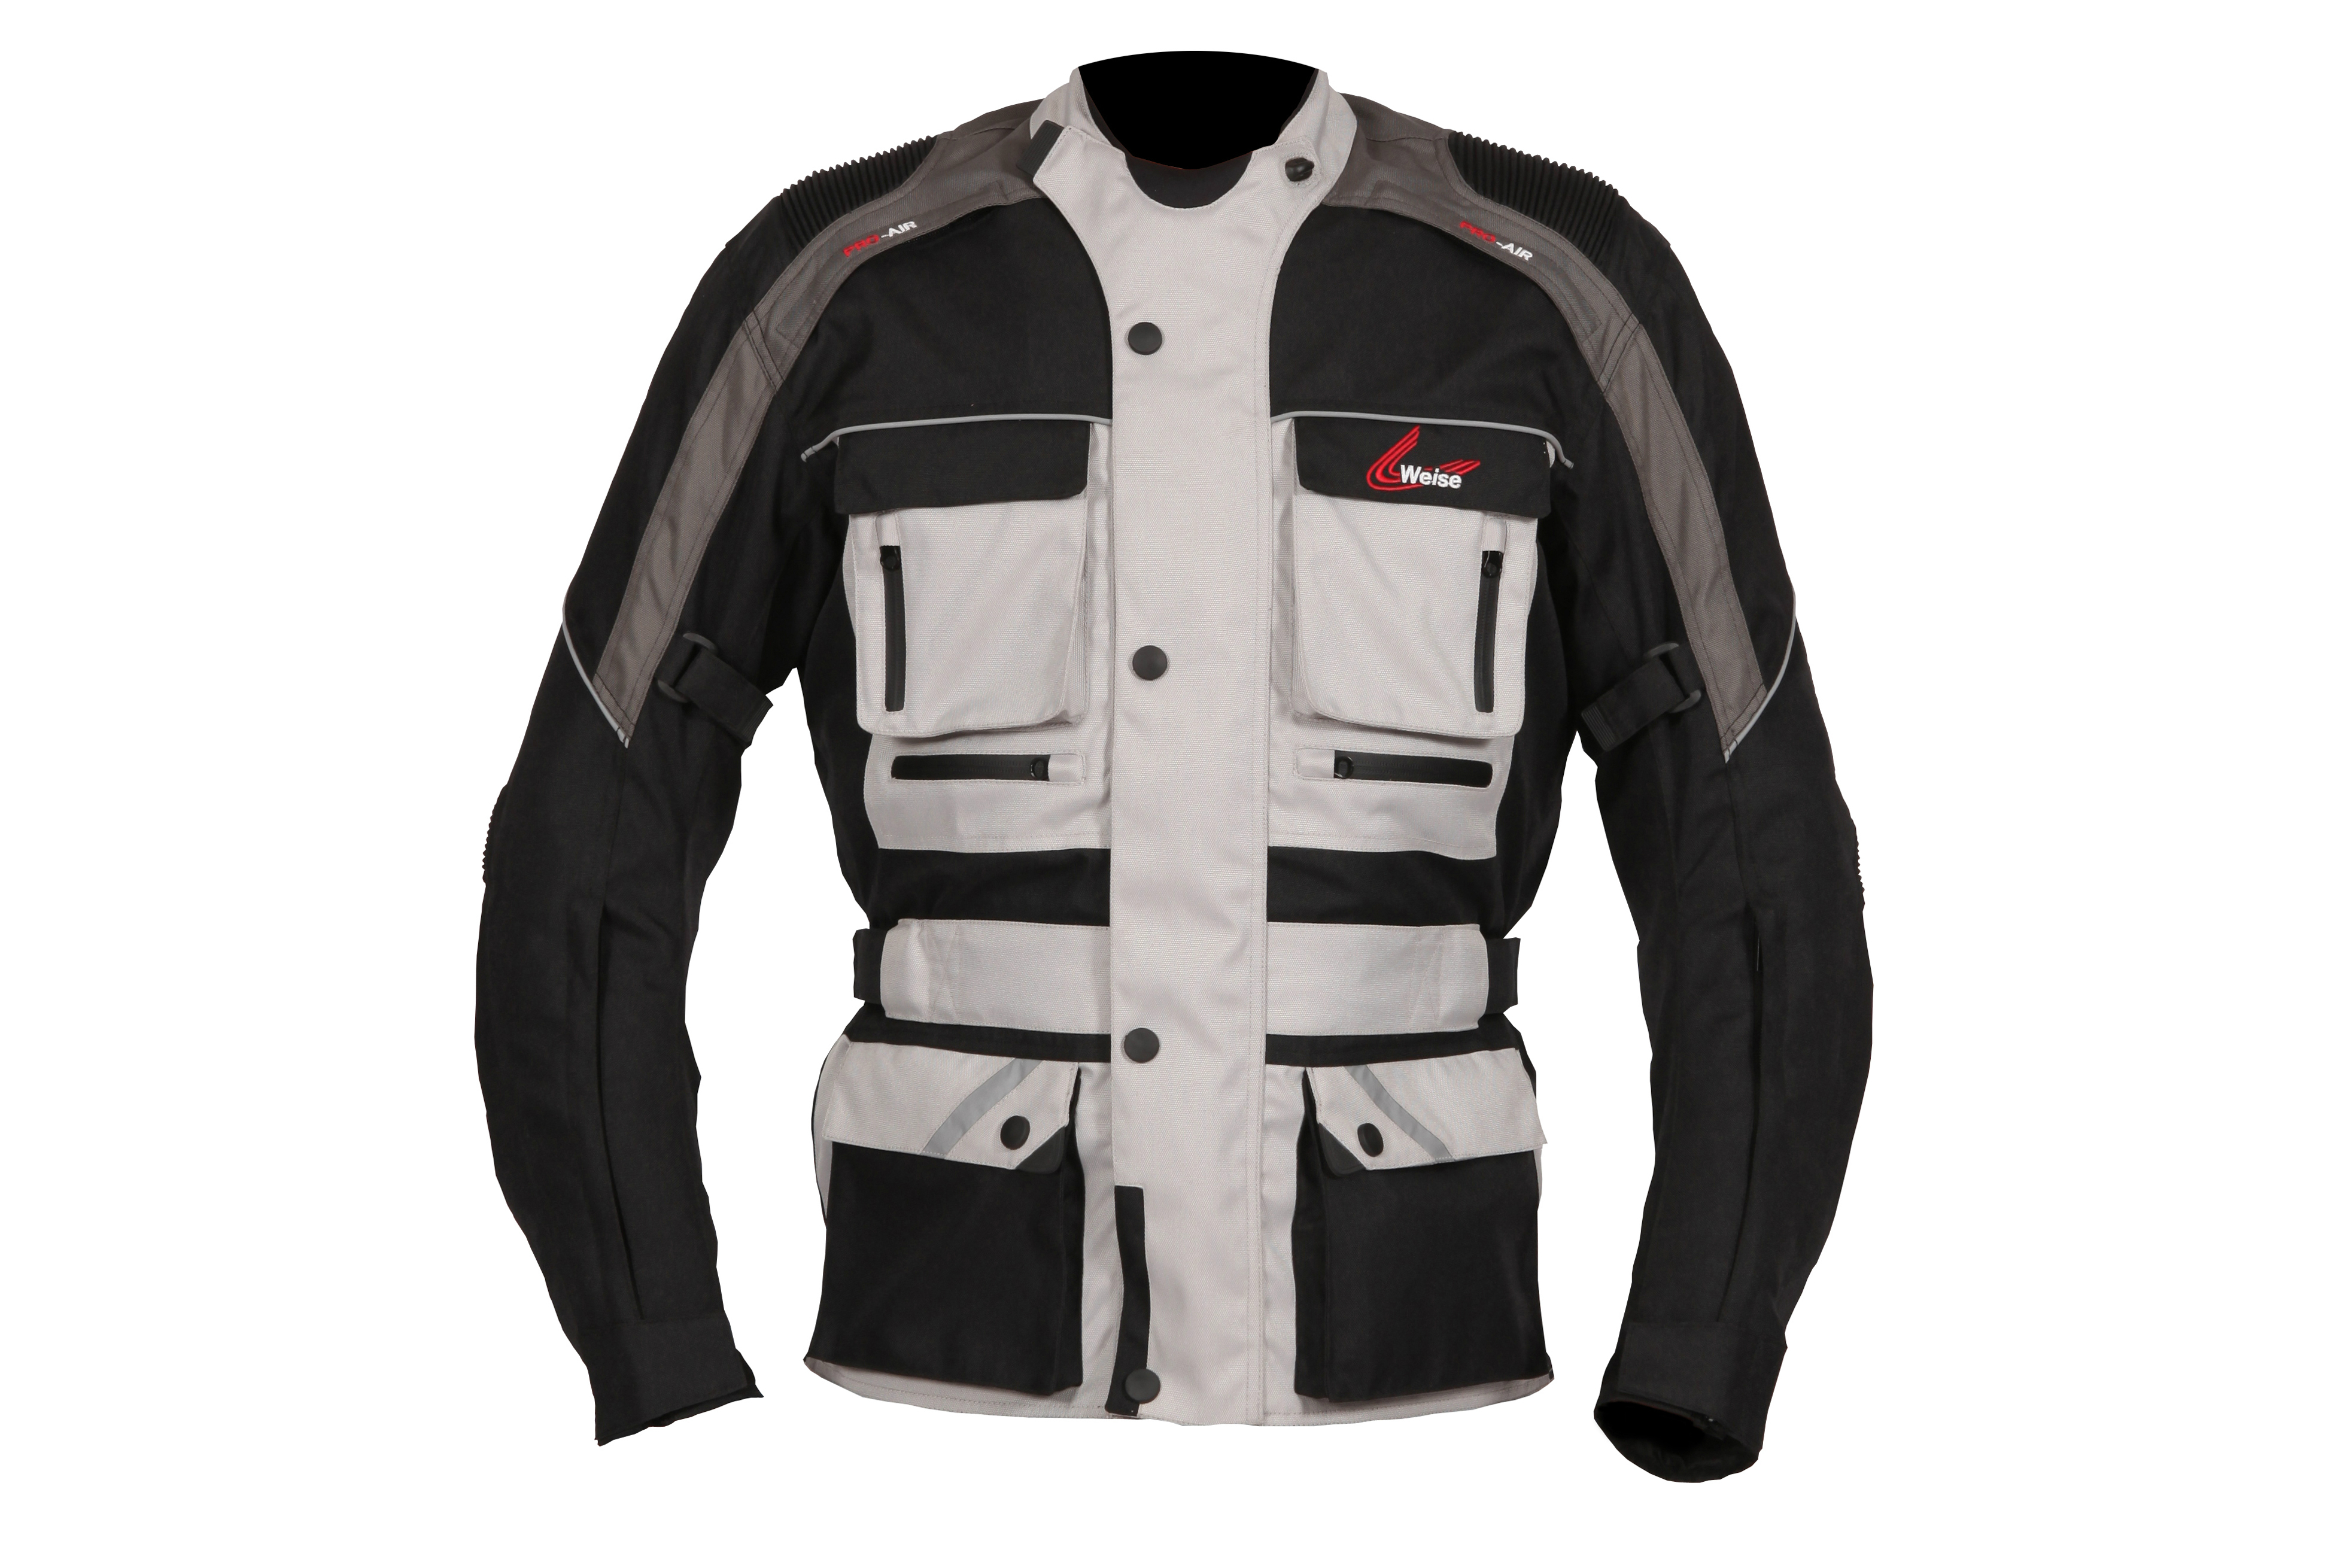 Zurich Motorcycle Riding Gear - Motorcycle Classics